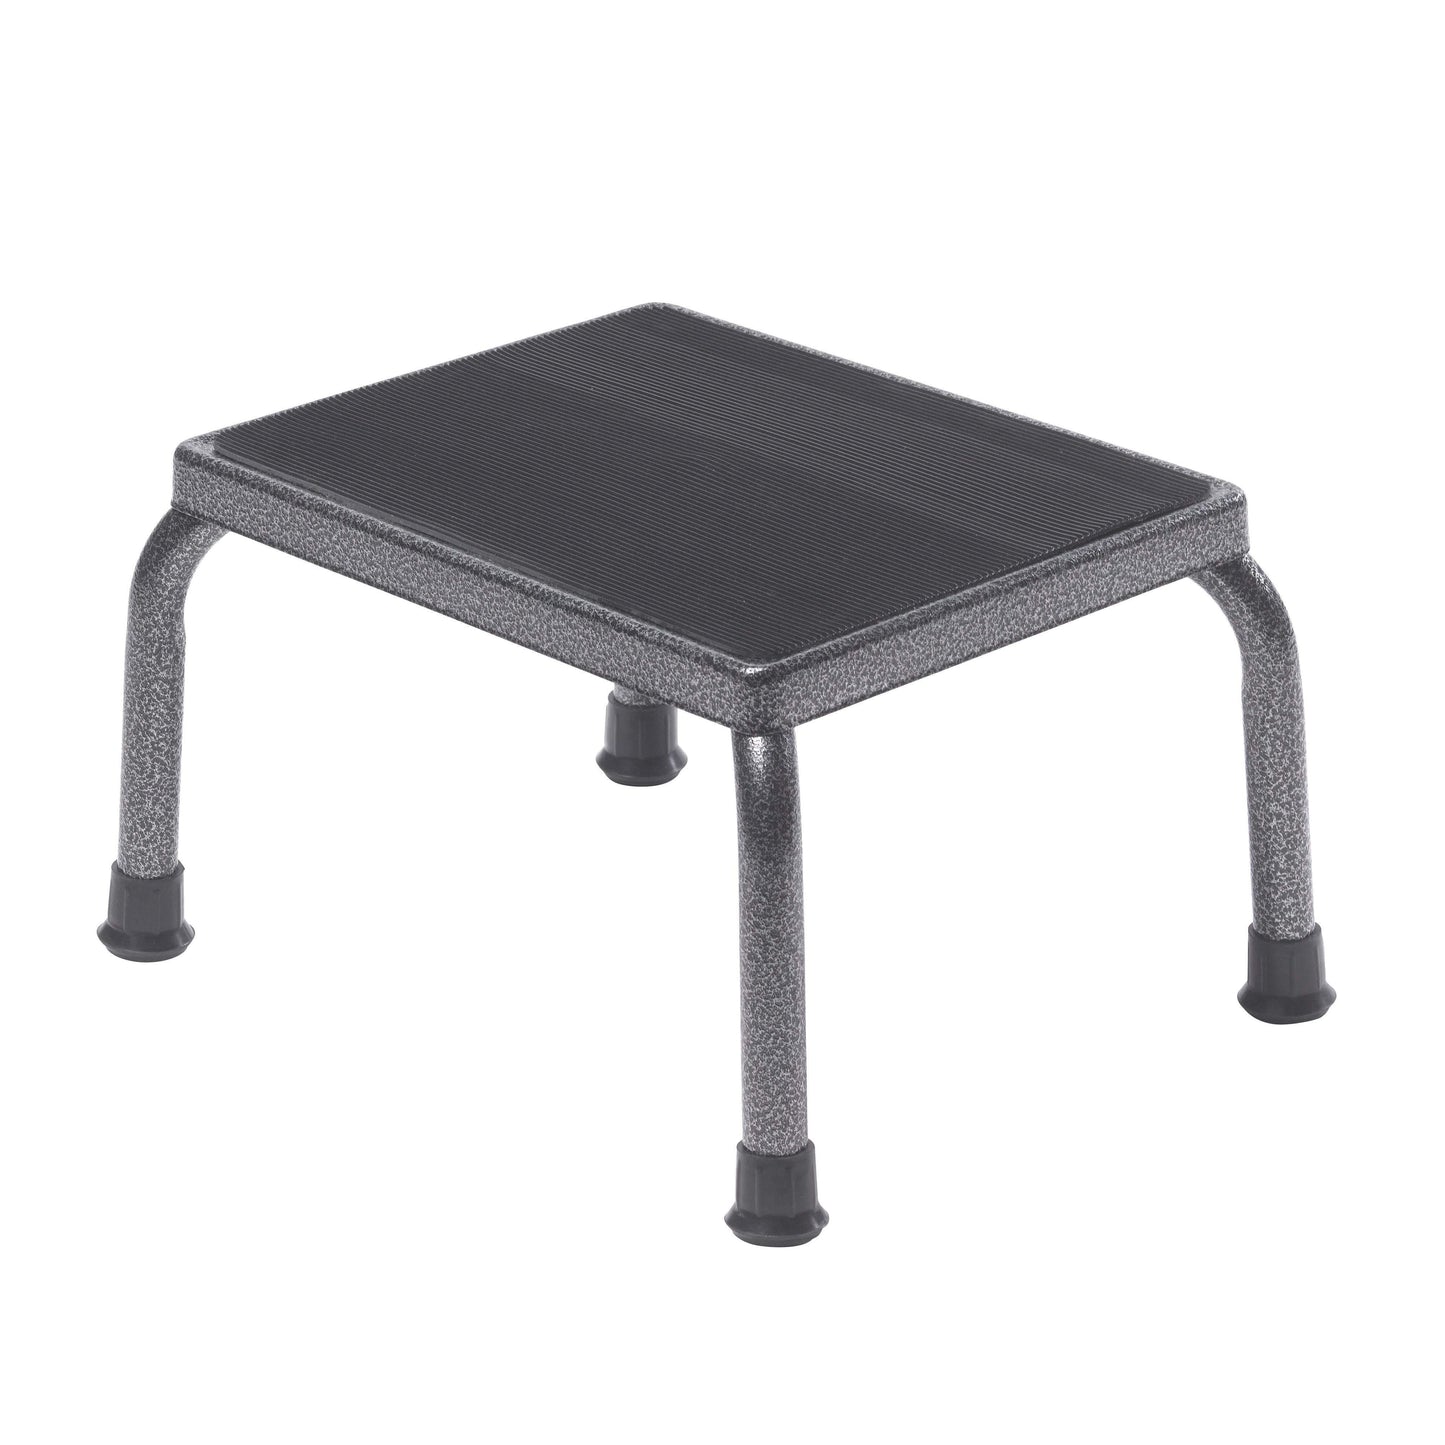 Drive 13030-1sv Footstool with Non Skid Rubber Platform